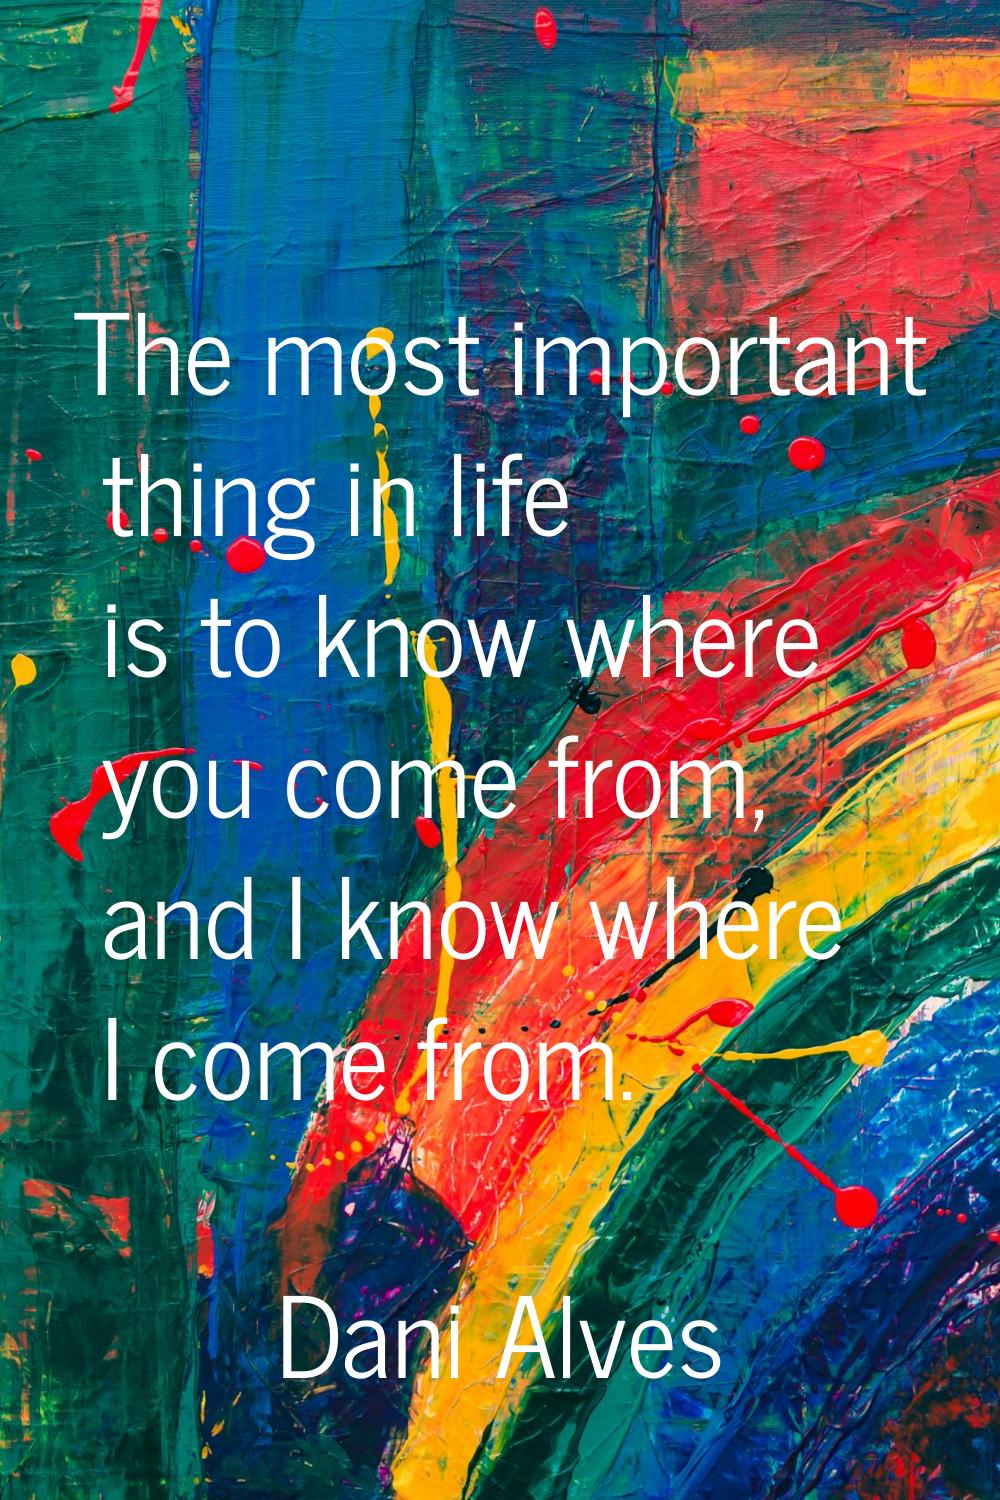 The most important thing in life is to know where you come from, and I know where I come from.